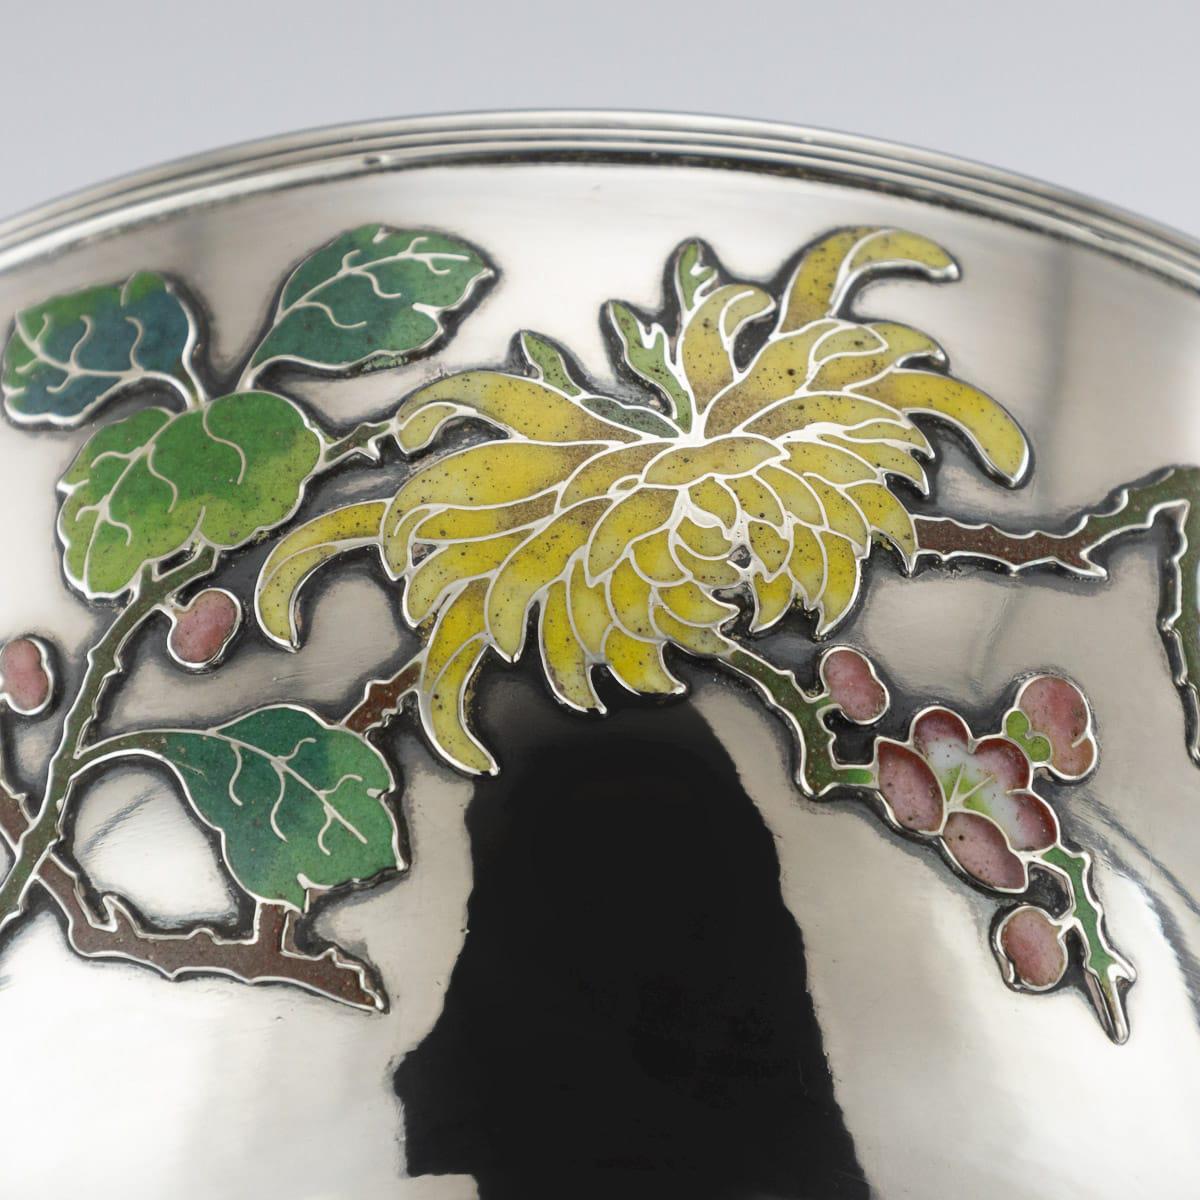 19th Century Rare Chinese Export Solid Silver & Enamel Bowl, Wo Kwong circa 1890 For Sale 11